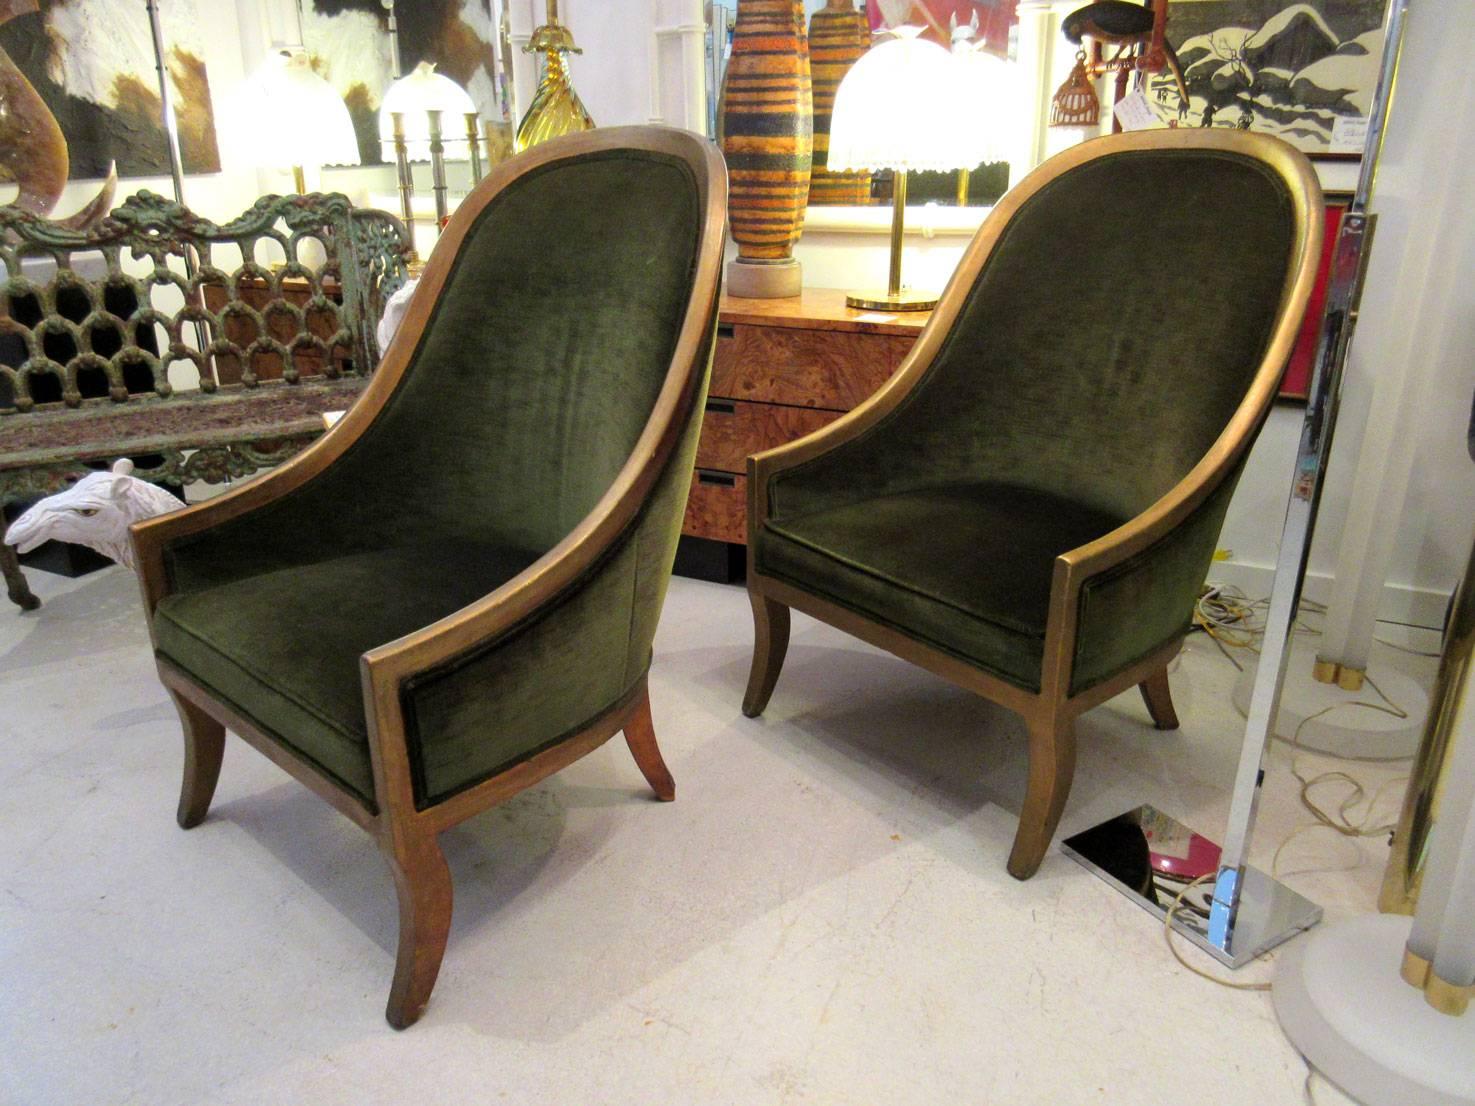 Pair of vintage slipper chairs in moss green velvet with gilt gold edge by New York company B. Altman.

Chairs were produced in the 1940s. Have been reupholstered in the 1970s.